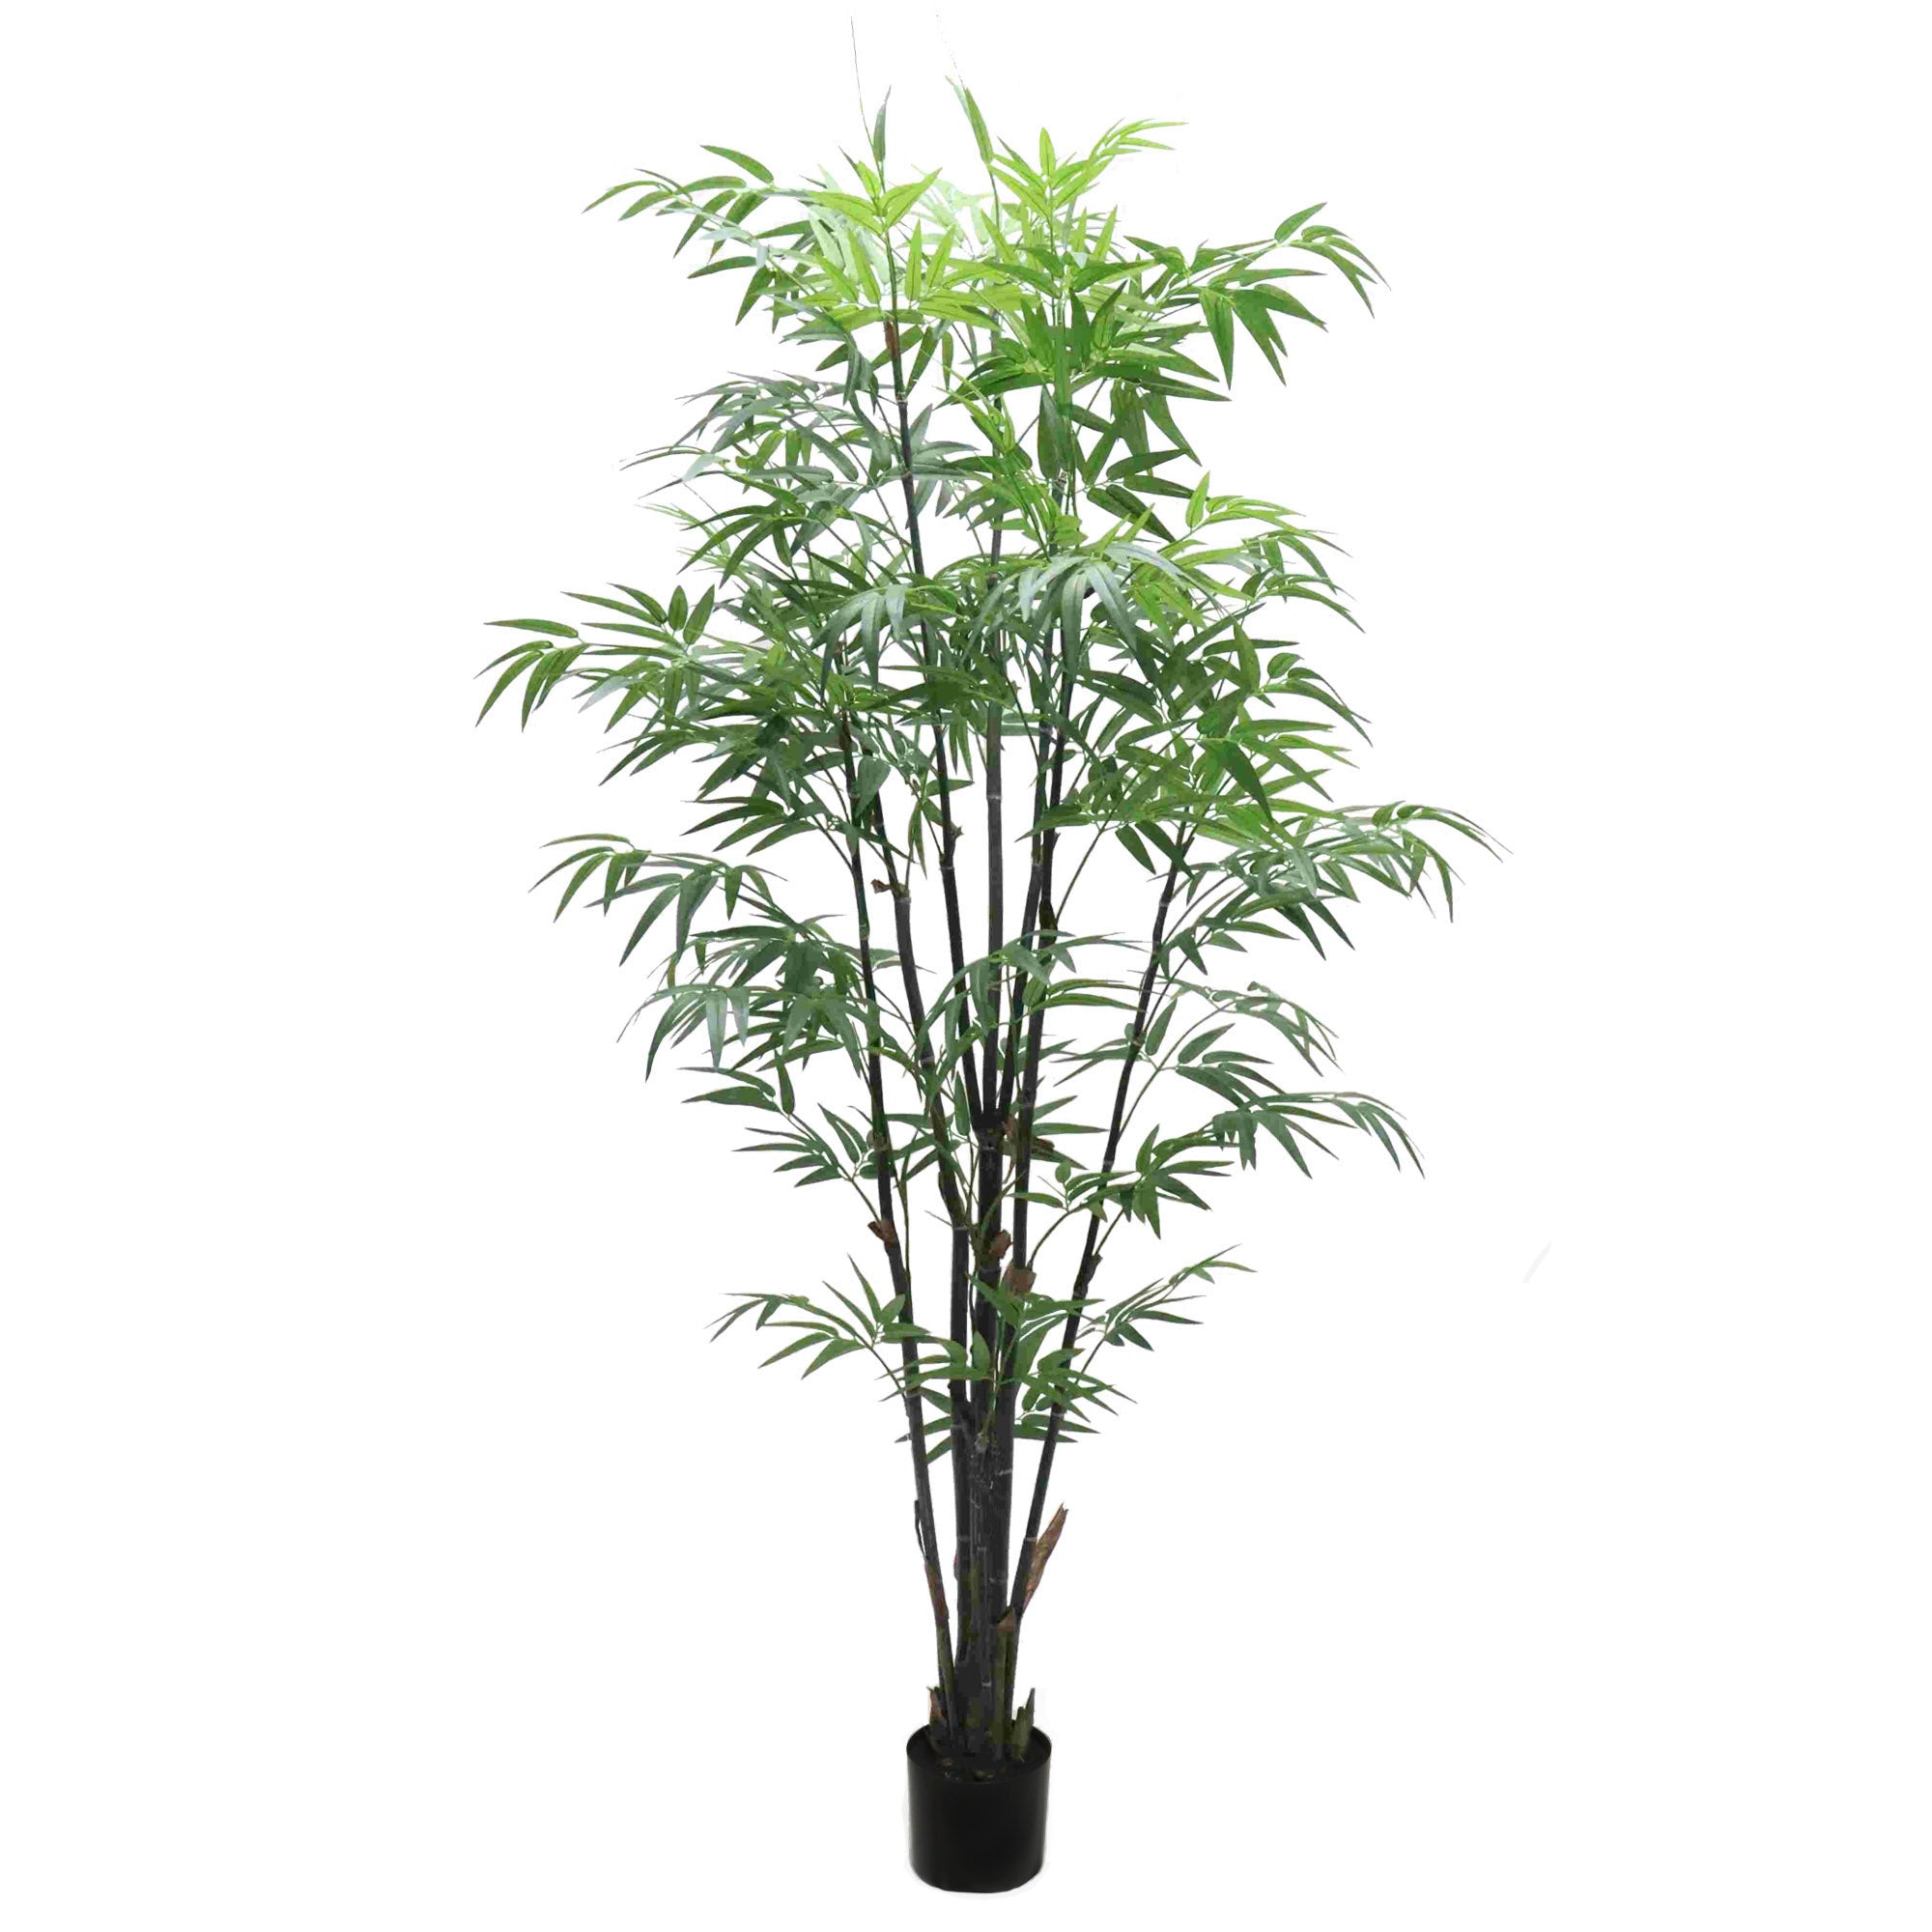 Premium 6' Natural Bamboo Plant with 1065 Leaves - Indoor/Outdoor Greenery Decoration - Lifelike Artificial Foliage in Pot